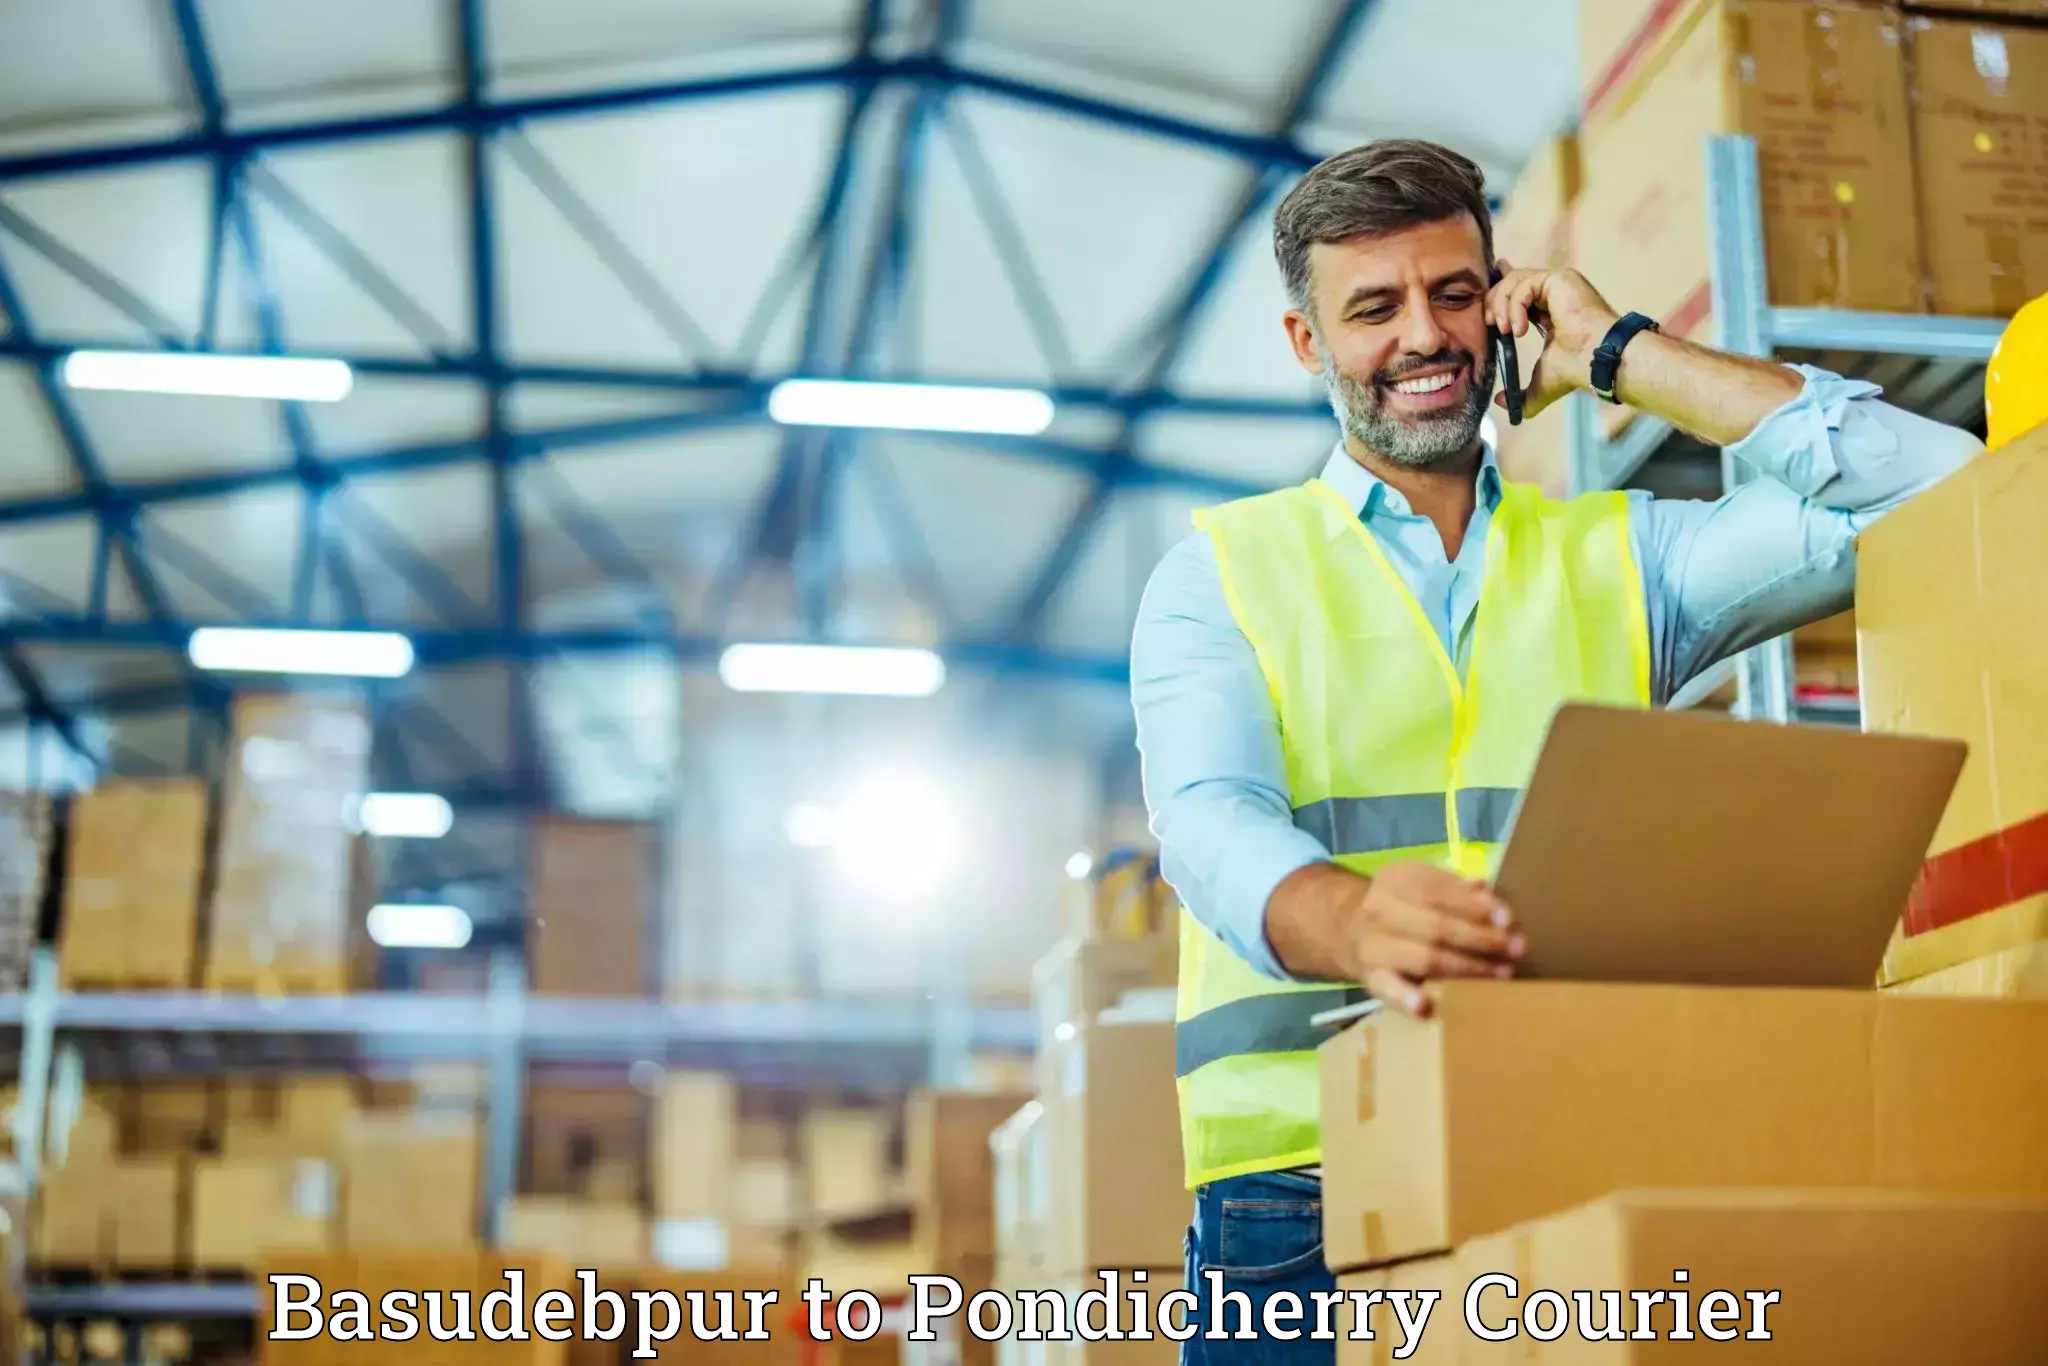 Trusted relocation experts Basudebpur to Pondicherry